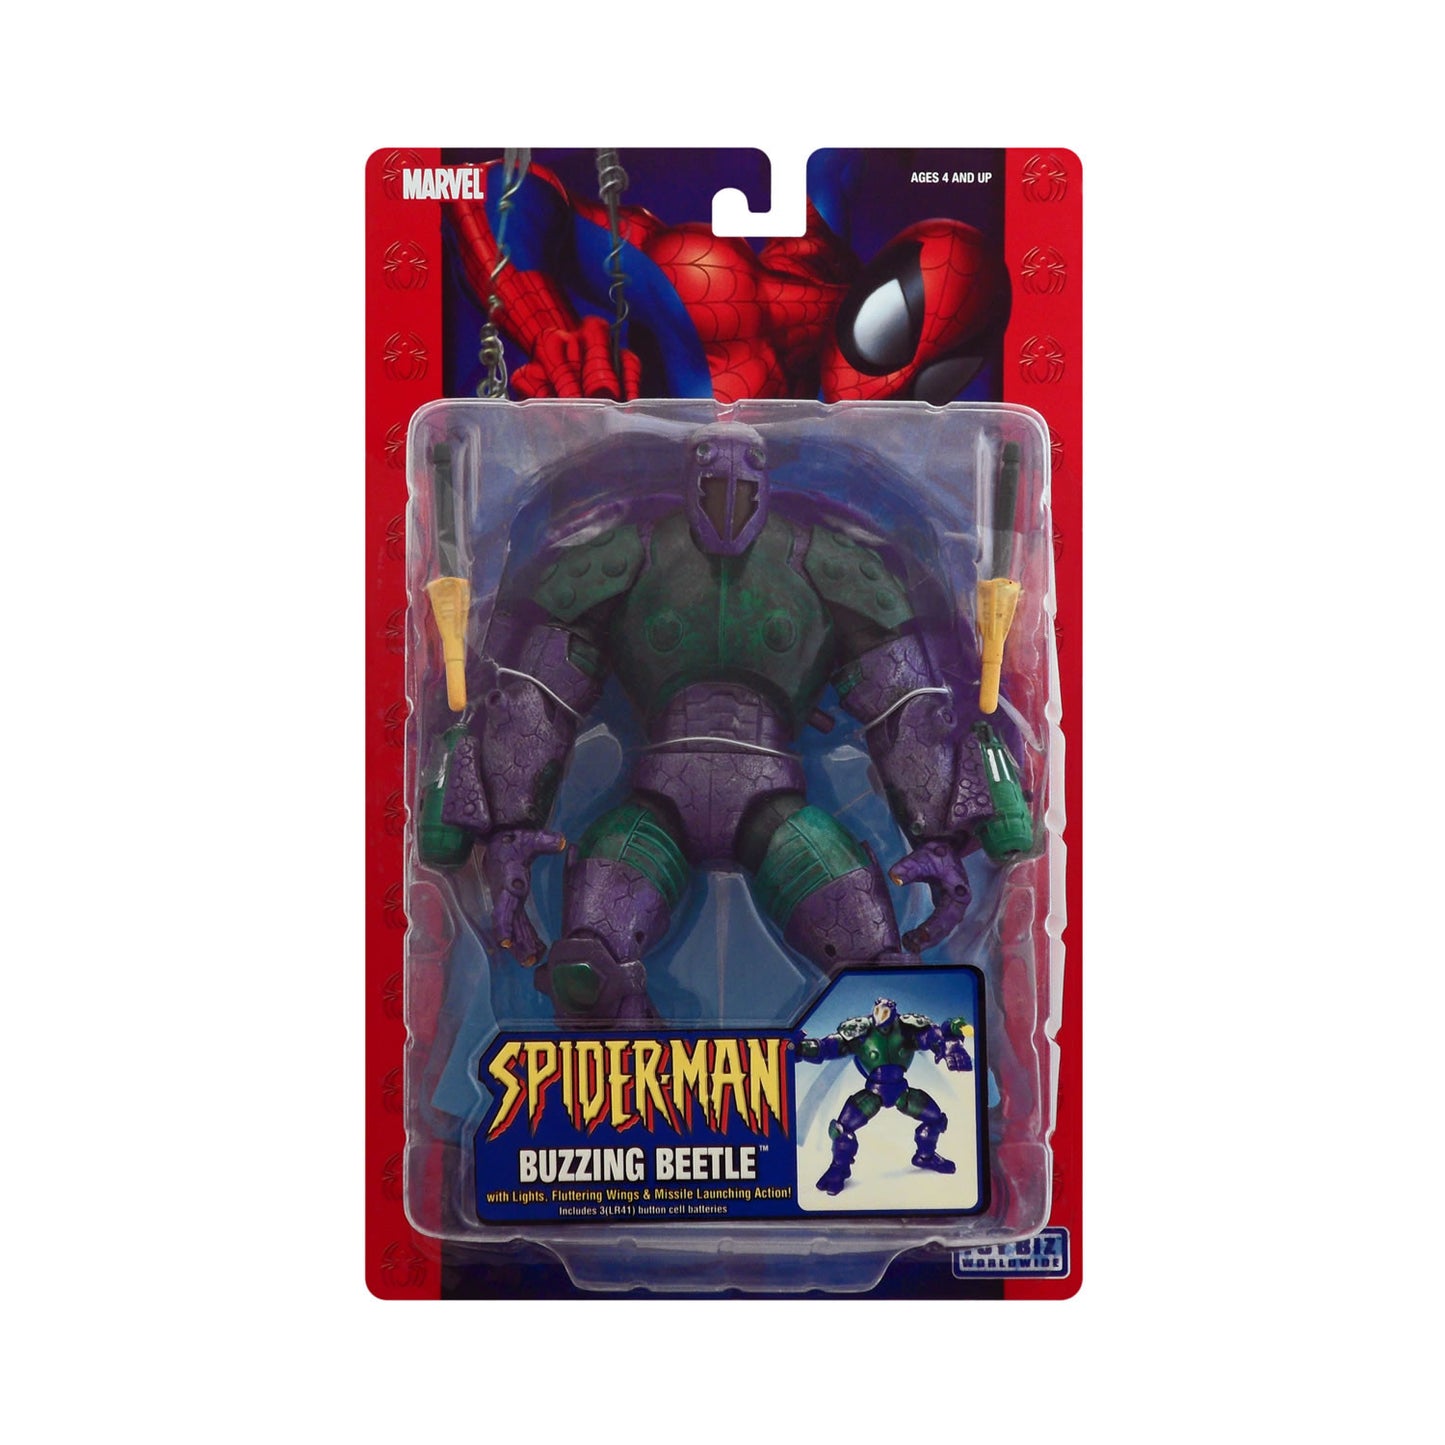 Spider-Man Classics Buzzing Beetle with Lights, Fluttering Wings, & Missile Launching Action 6-Inch Scale Action Figure